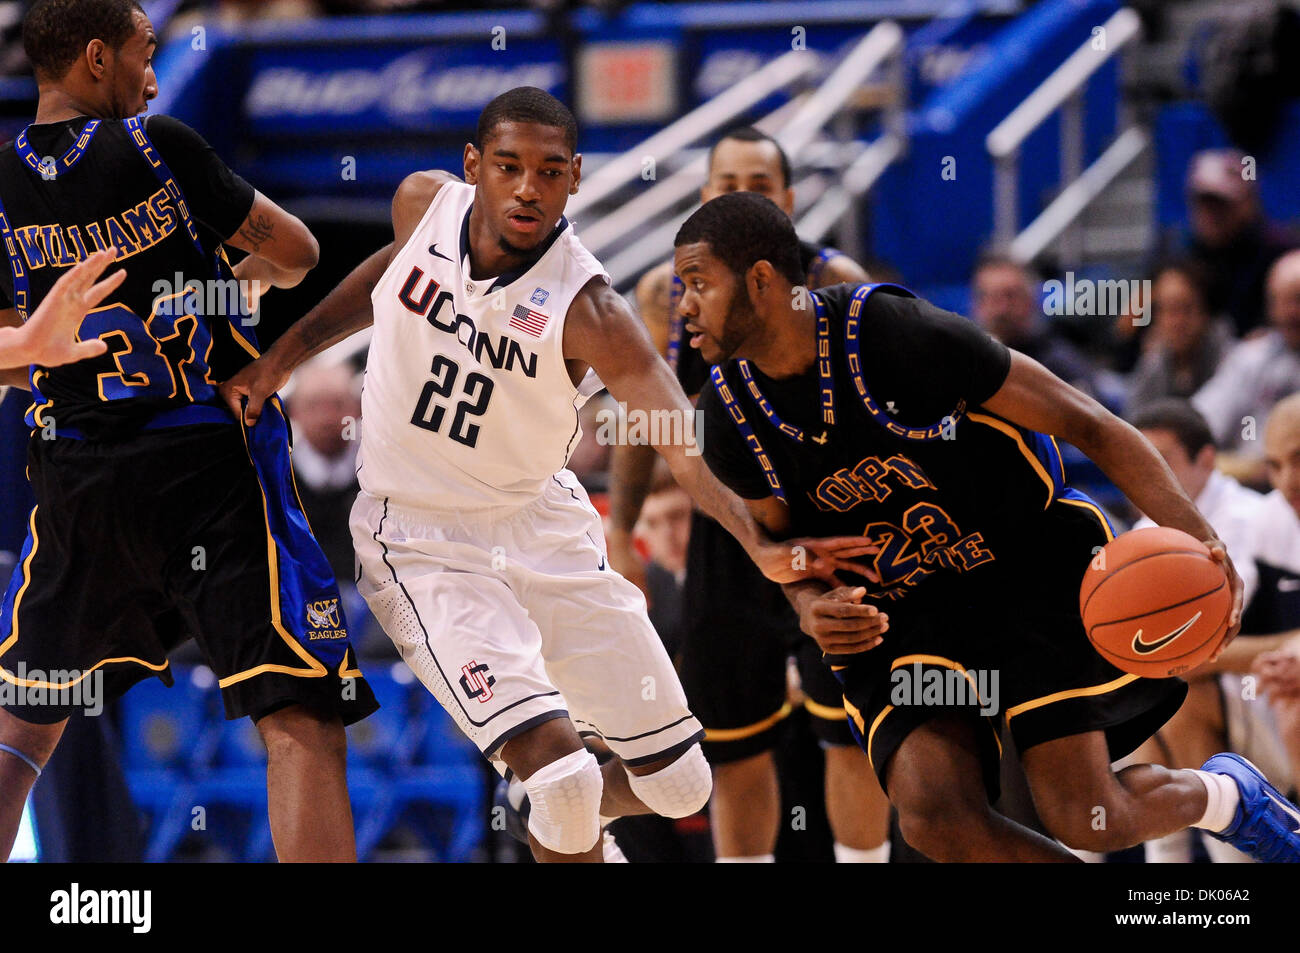 Dec. 20, 2010 - Hartford, Connecticut, United States of America - Connecticut F Roscoe Smith (22) guards Coppin State PF Akeem Ellis (23) while being picked by PF Antonio Williams (32). At the half #4 Connecticut leads Coppin State 39 - 19 at the XL Center. (Credit Image: © Geoff Bolte/Southcreek Global/ZUMAPRESS.com) Stock Photo